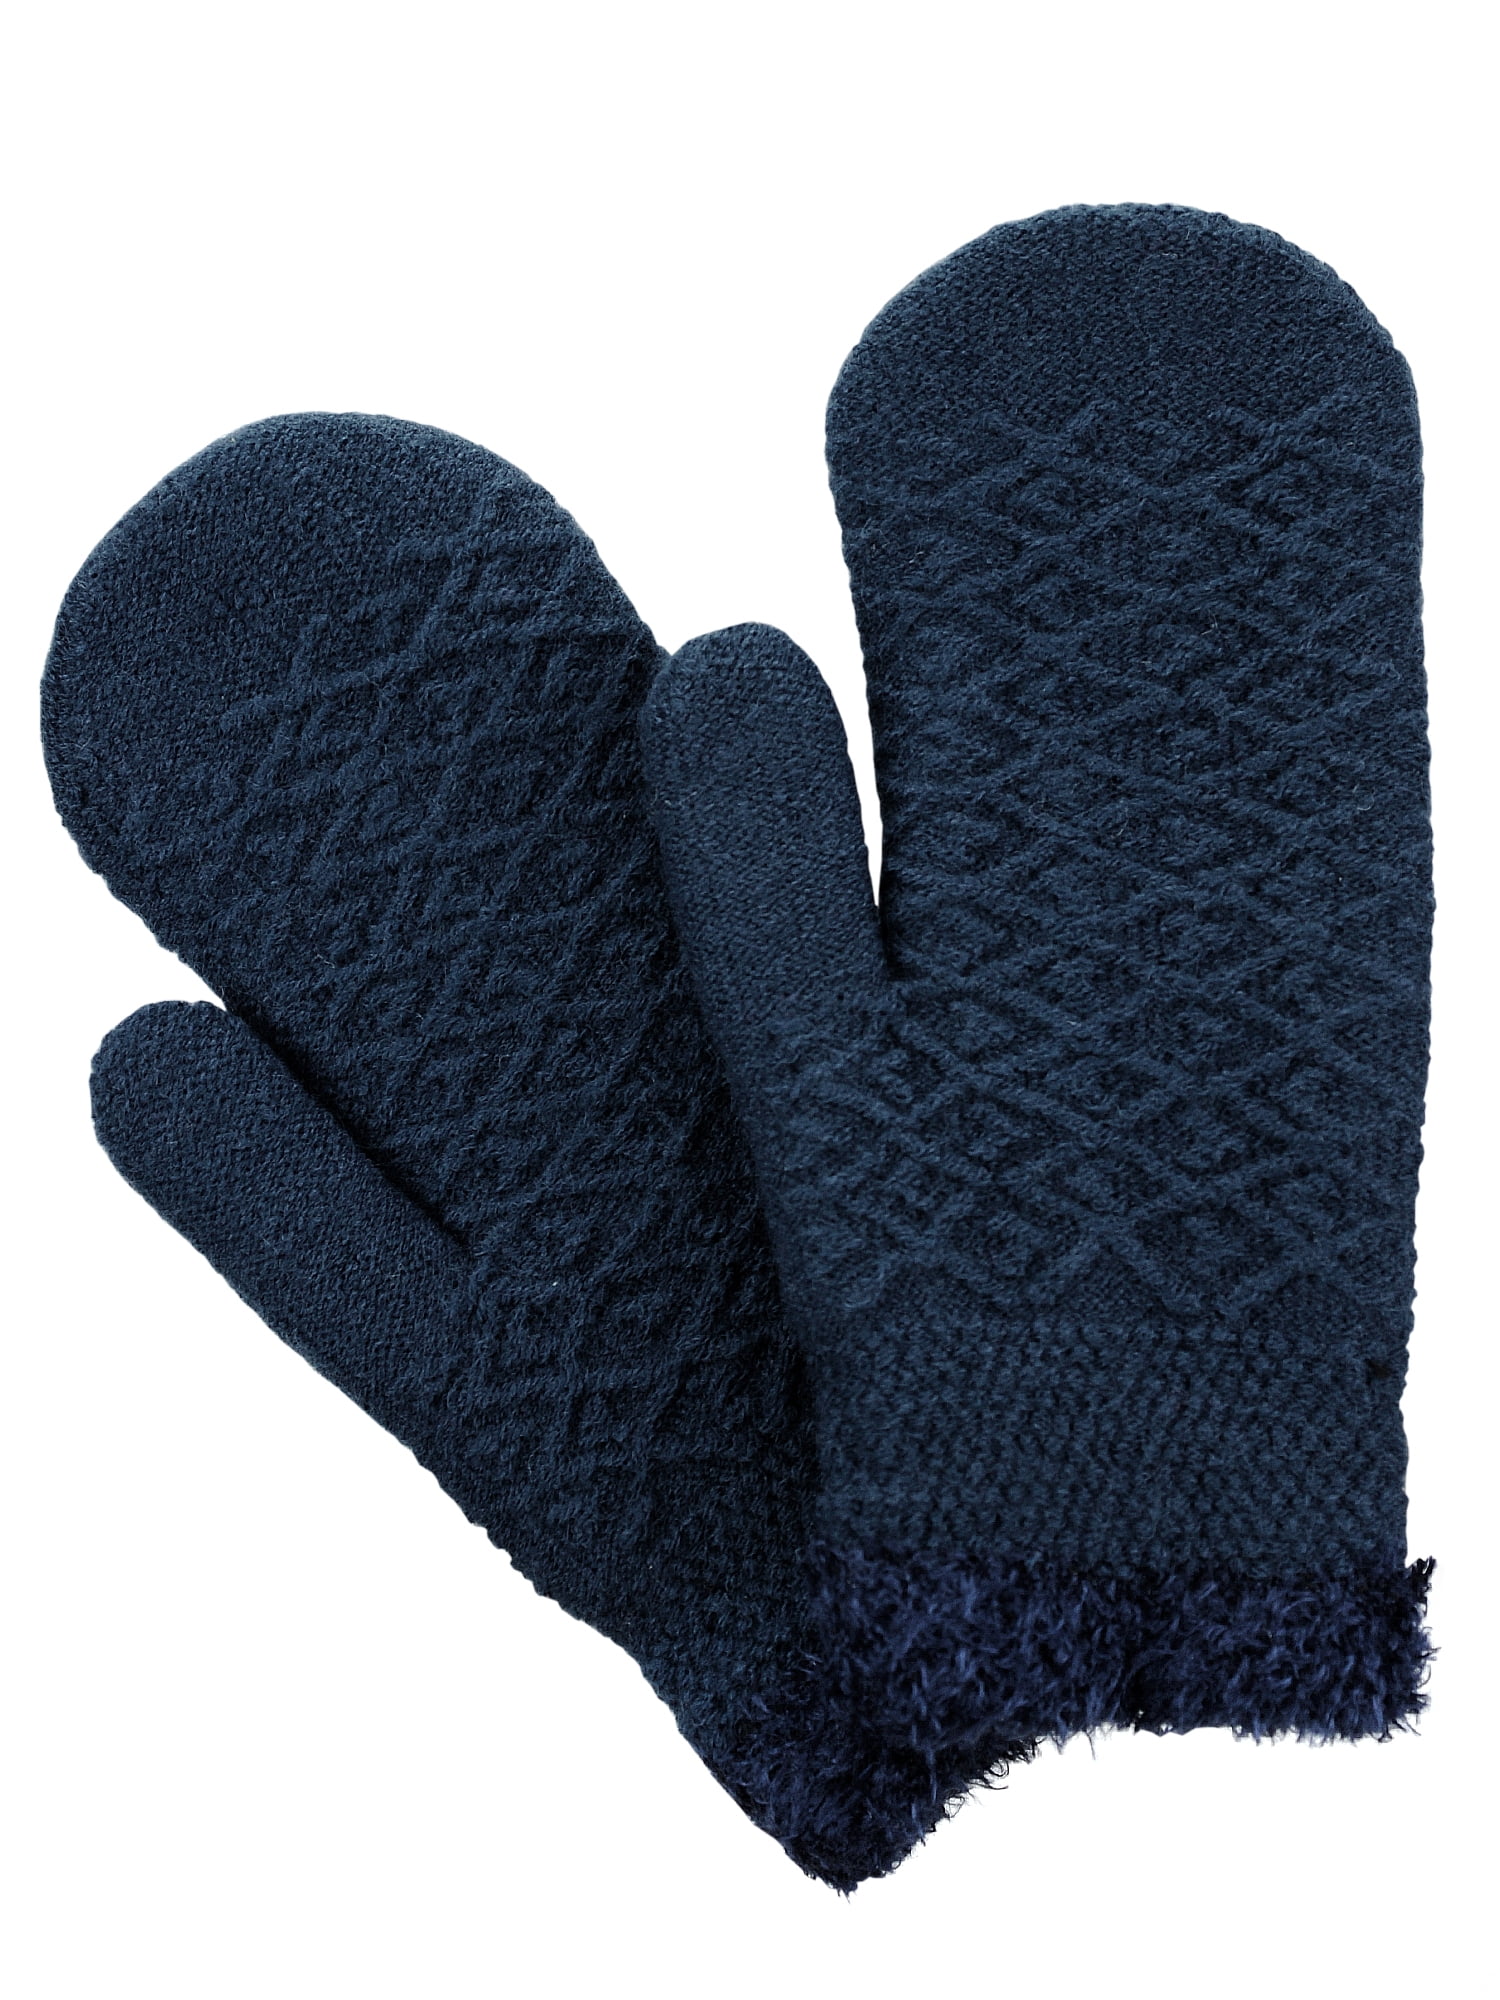 D&Y Womens Winter Warm Knit Plush Lined Stretchy Snug Fit Mittens